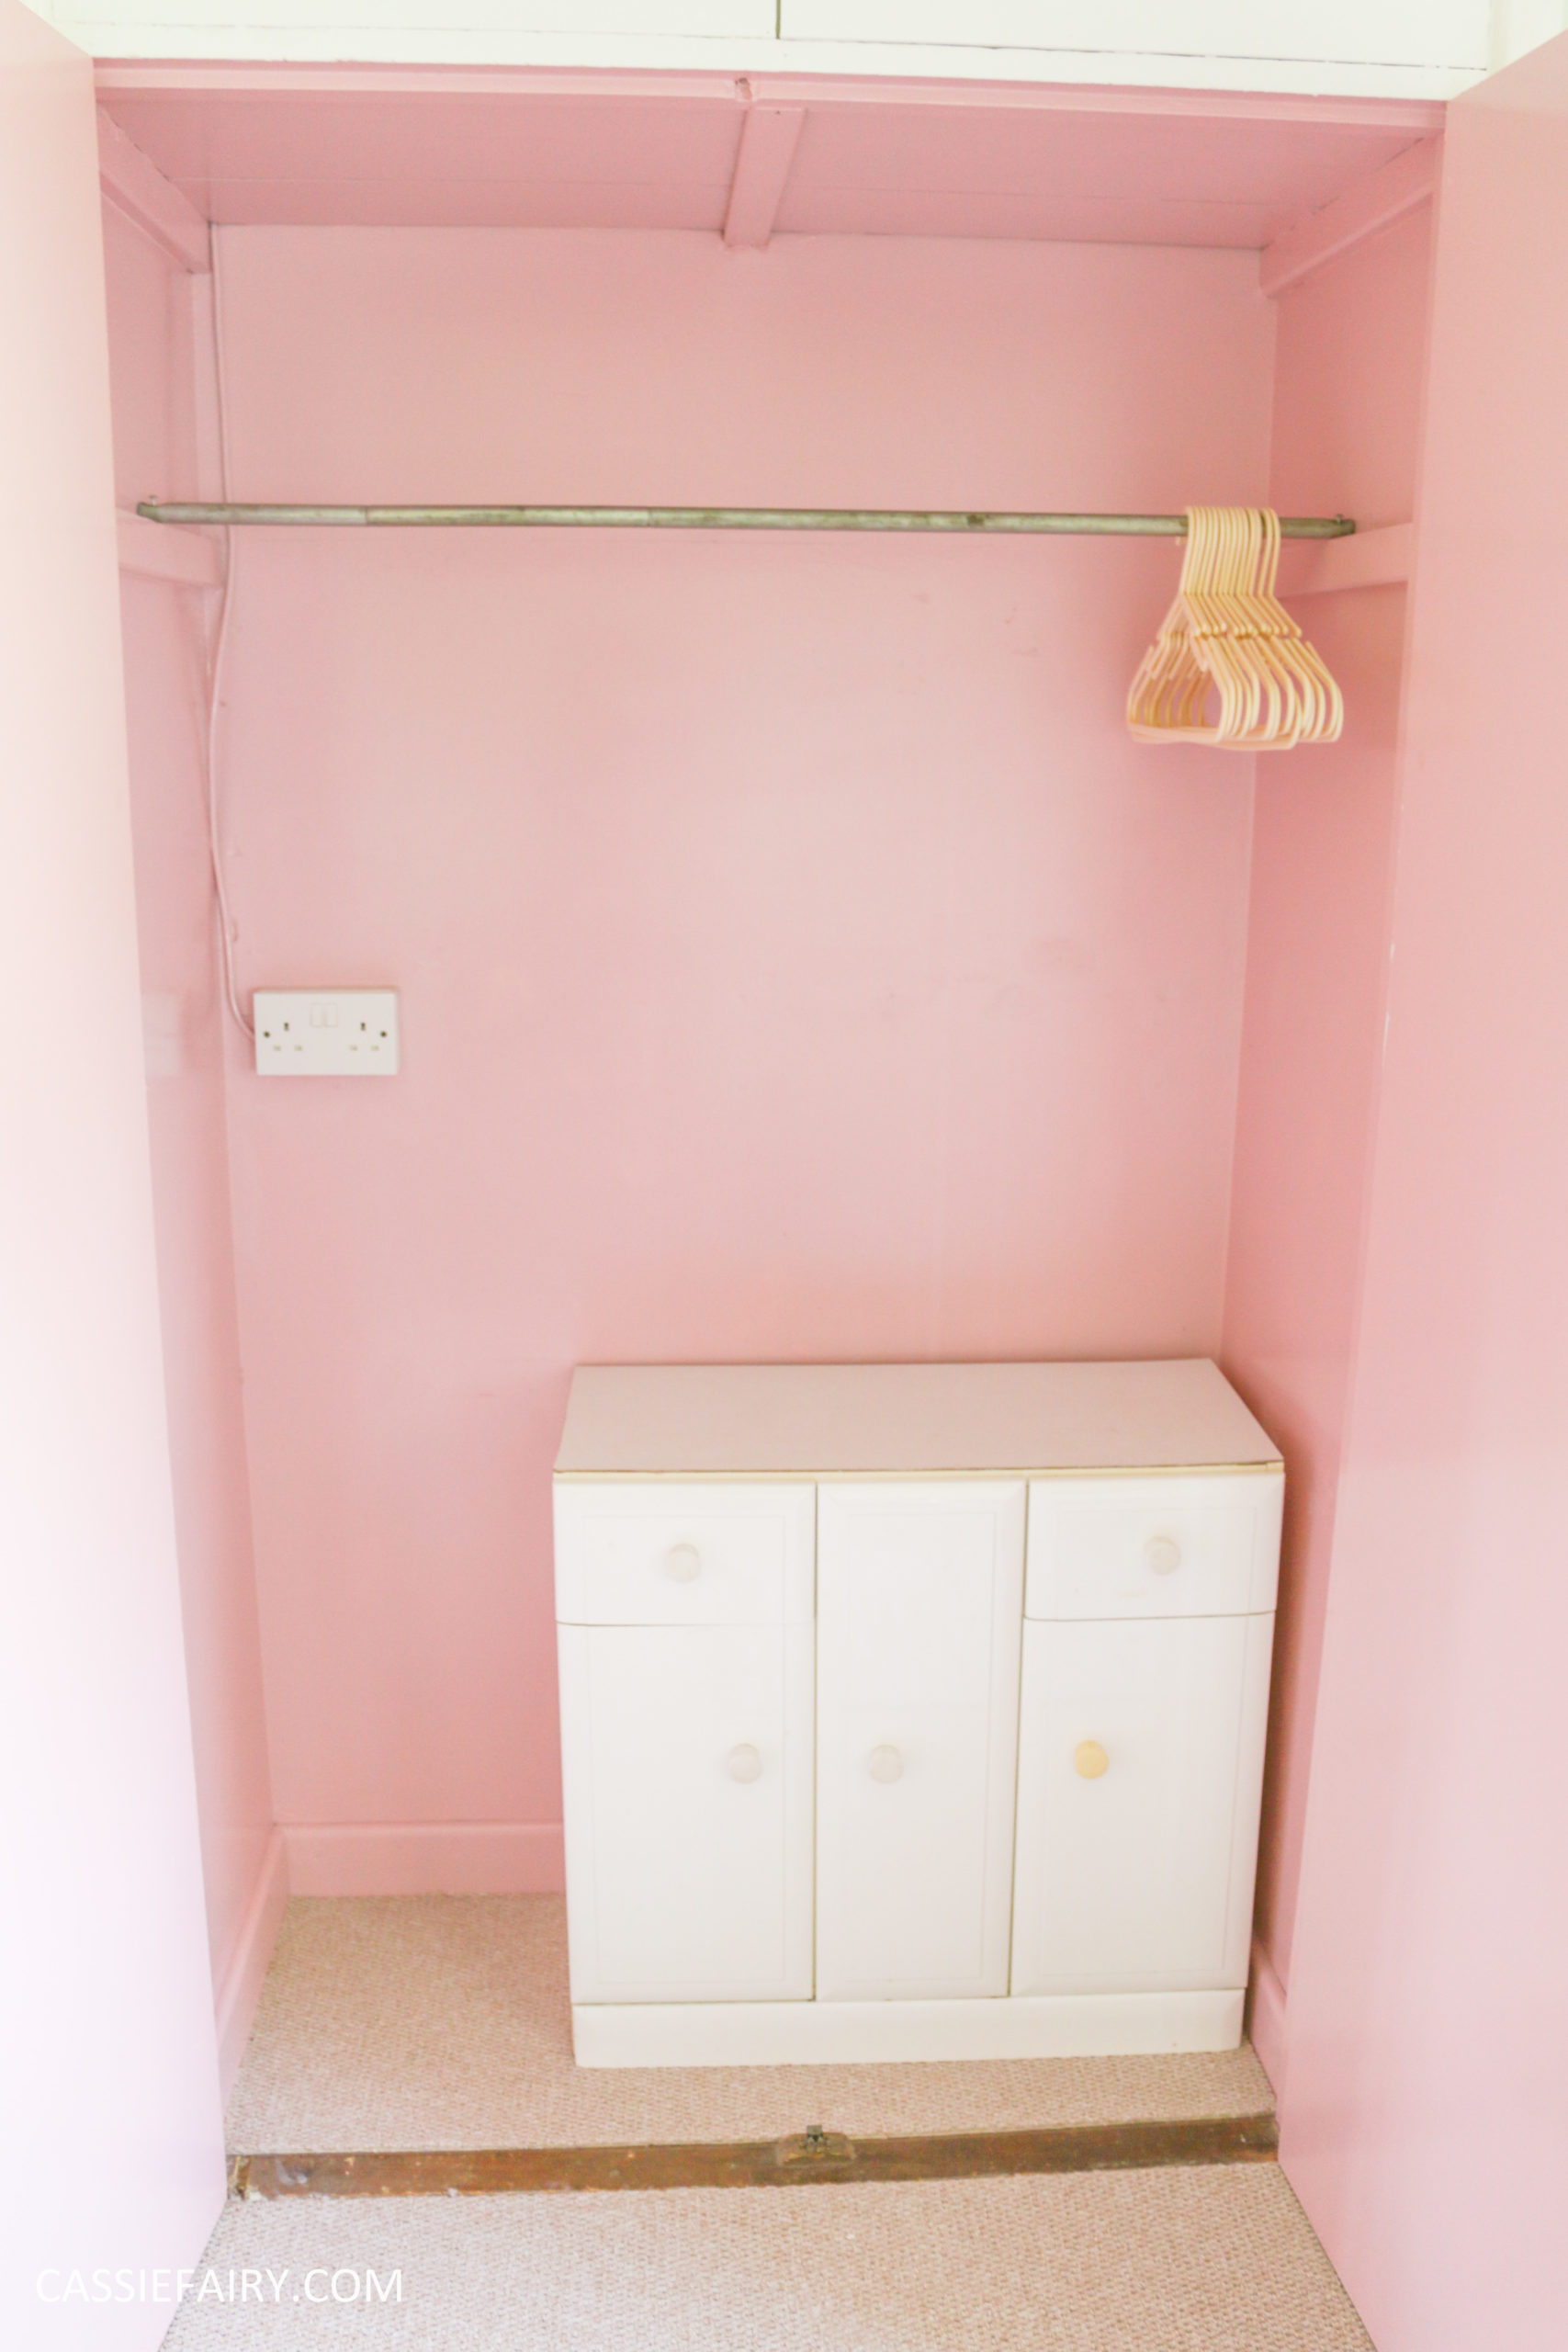 bright colour pink painted bedroom cupboard wardrobe interior diy interior  design idea project-2, My Thrifty Life by Cassie Fairy